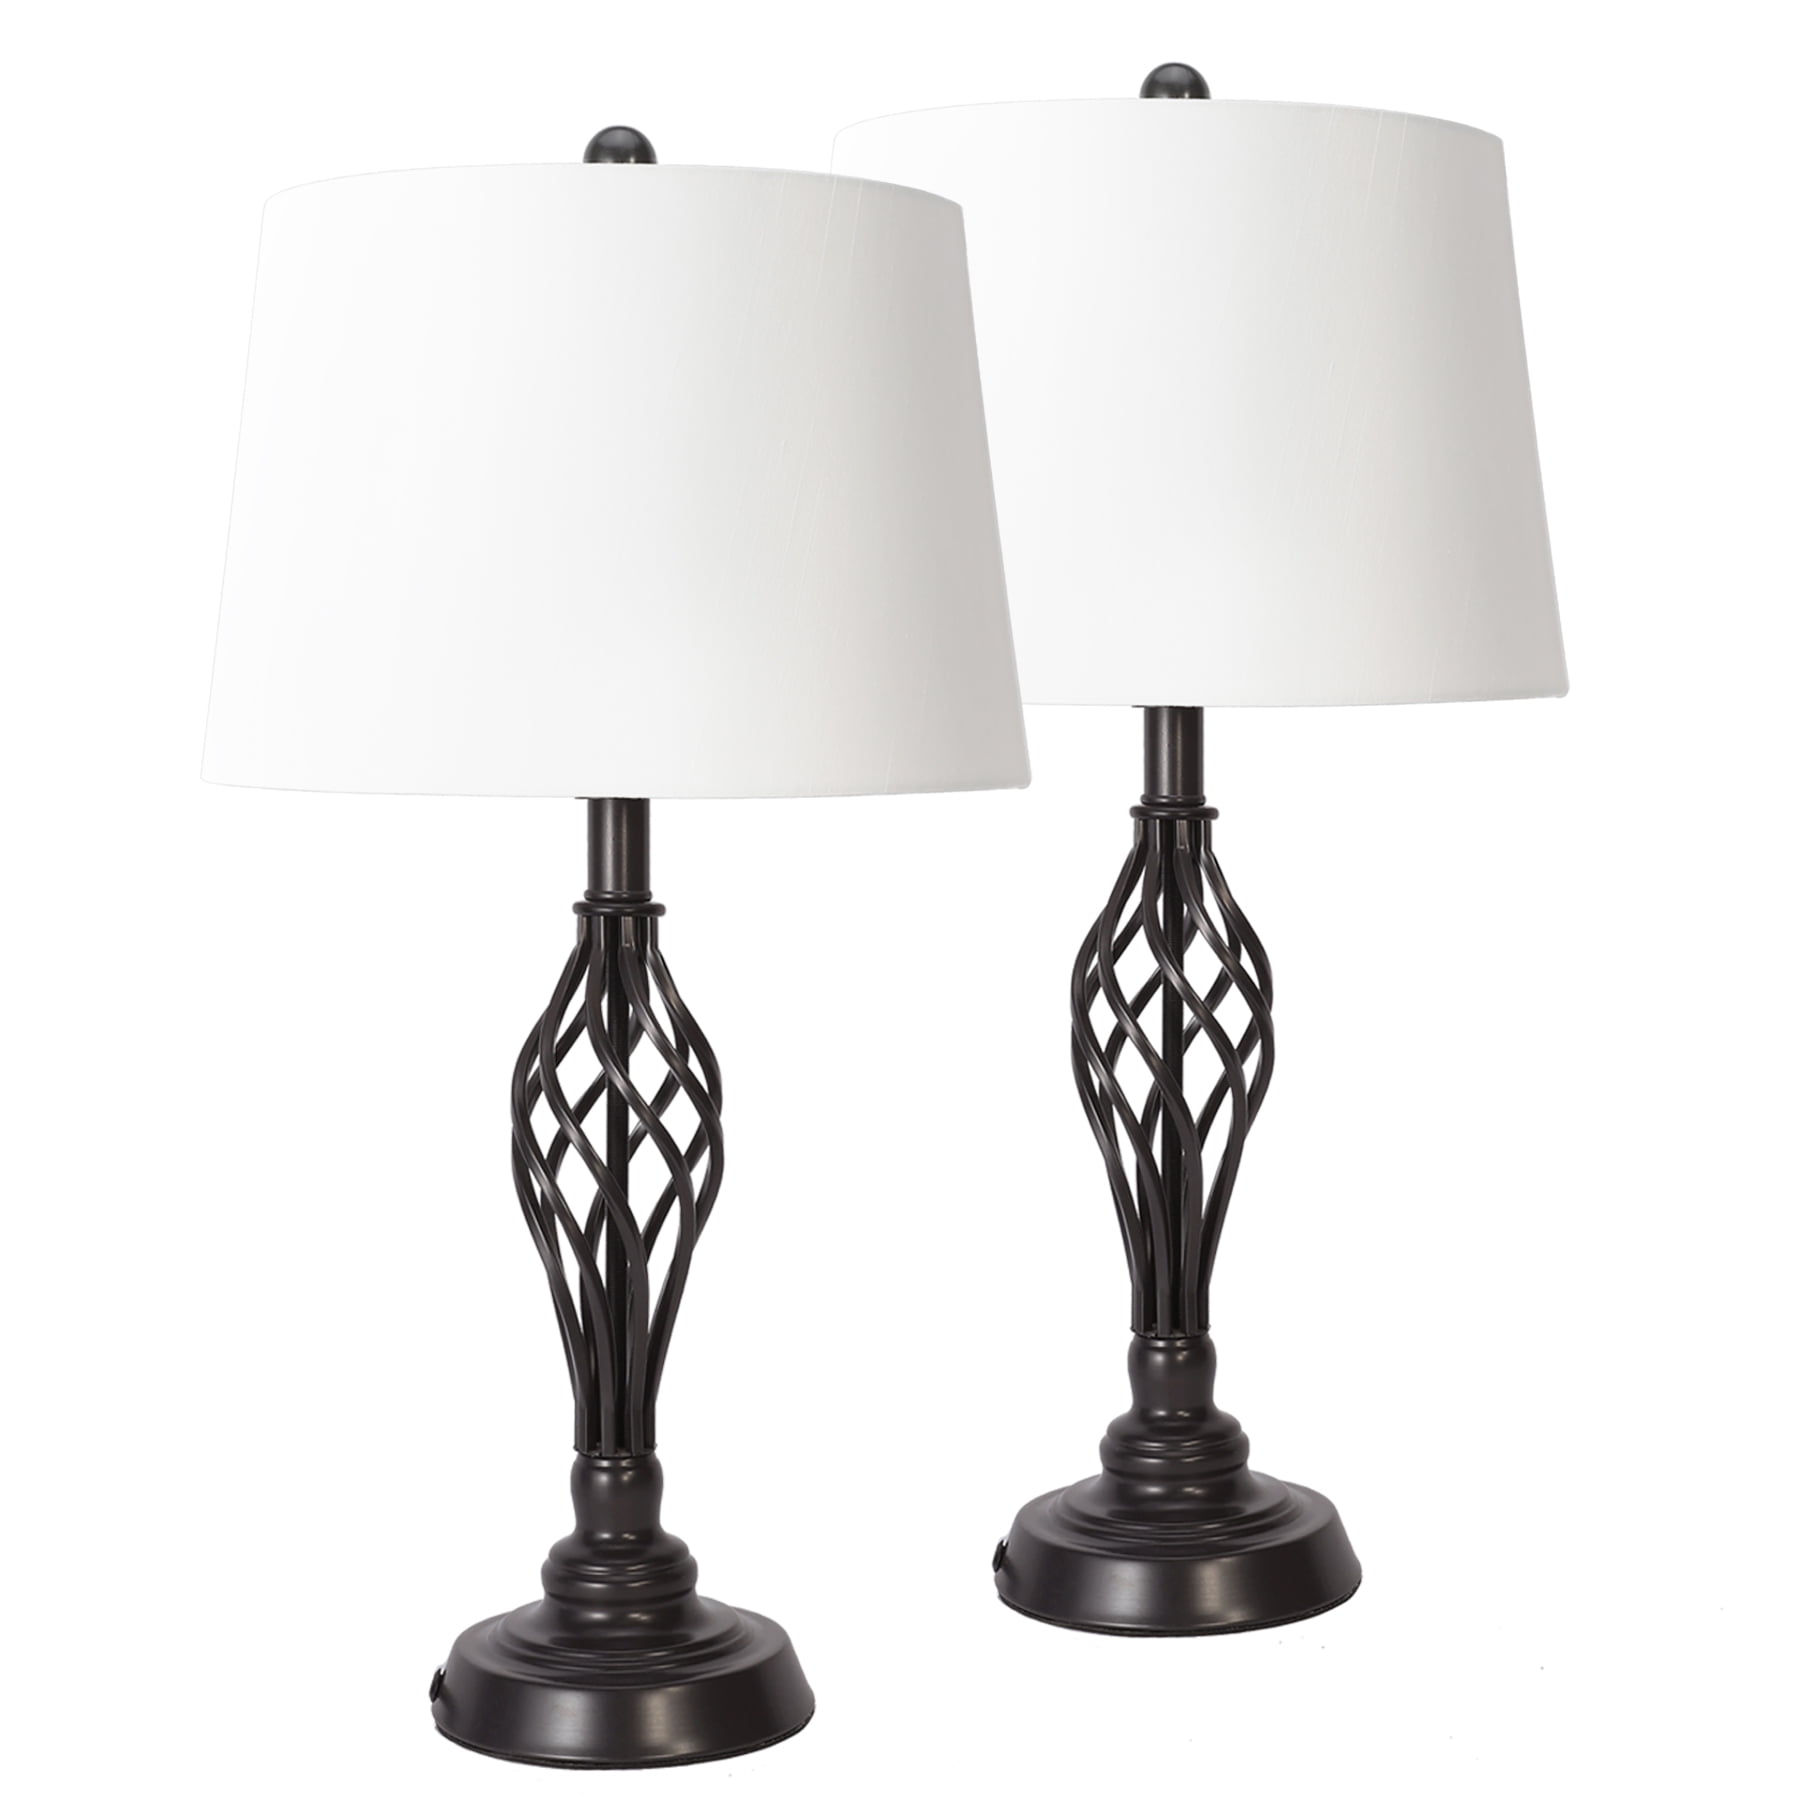 Farmhouse Table Lamps Set Of 2 Bronze, Industrial Bronze Iron Table Lamp With Beige Hardback Shade